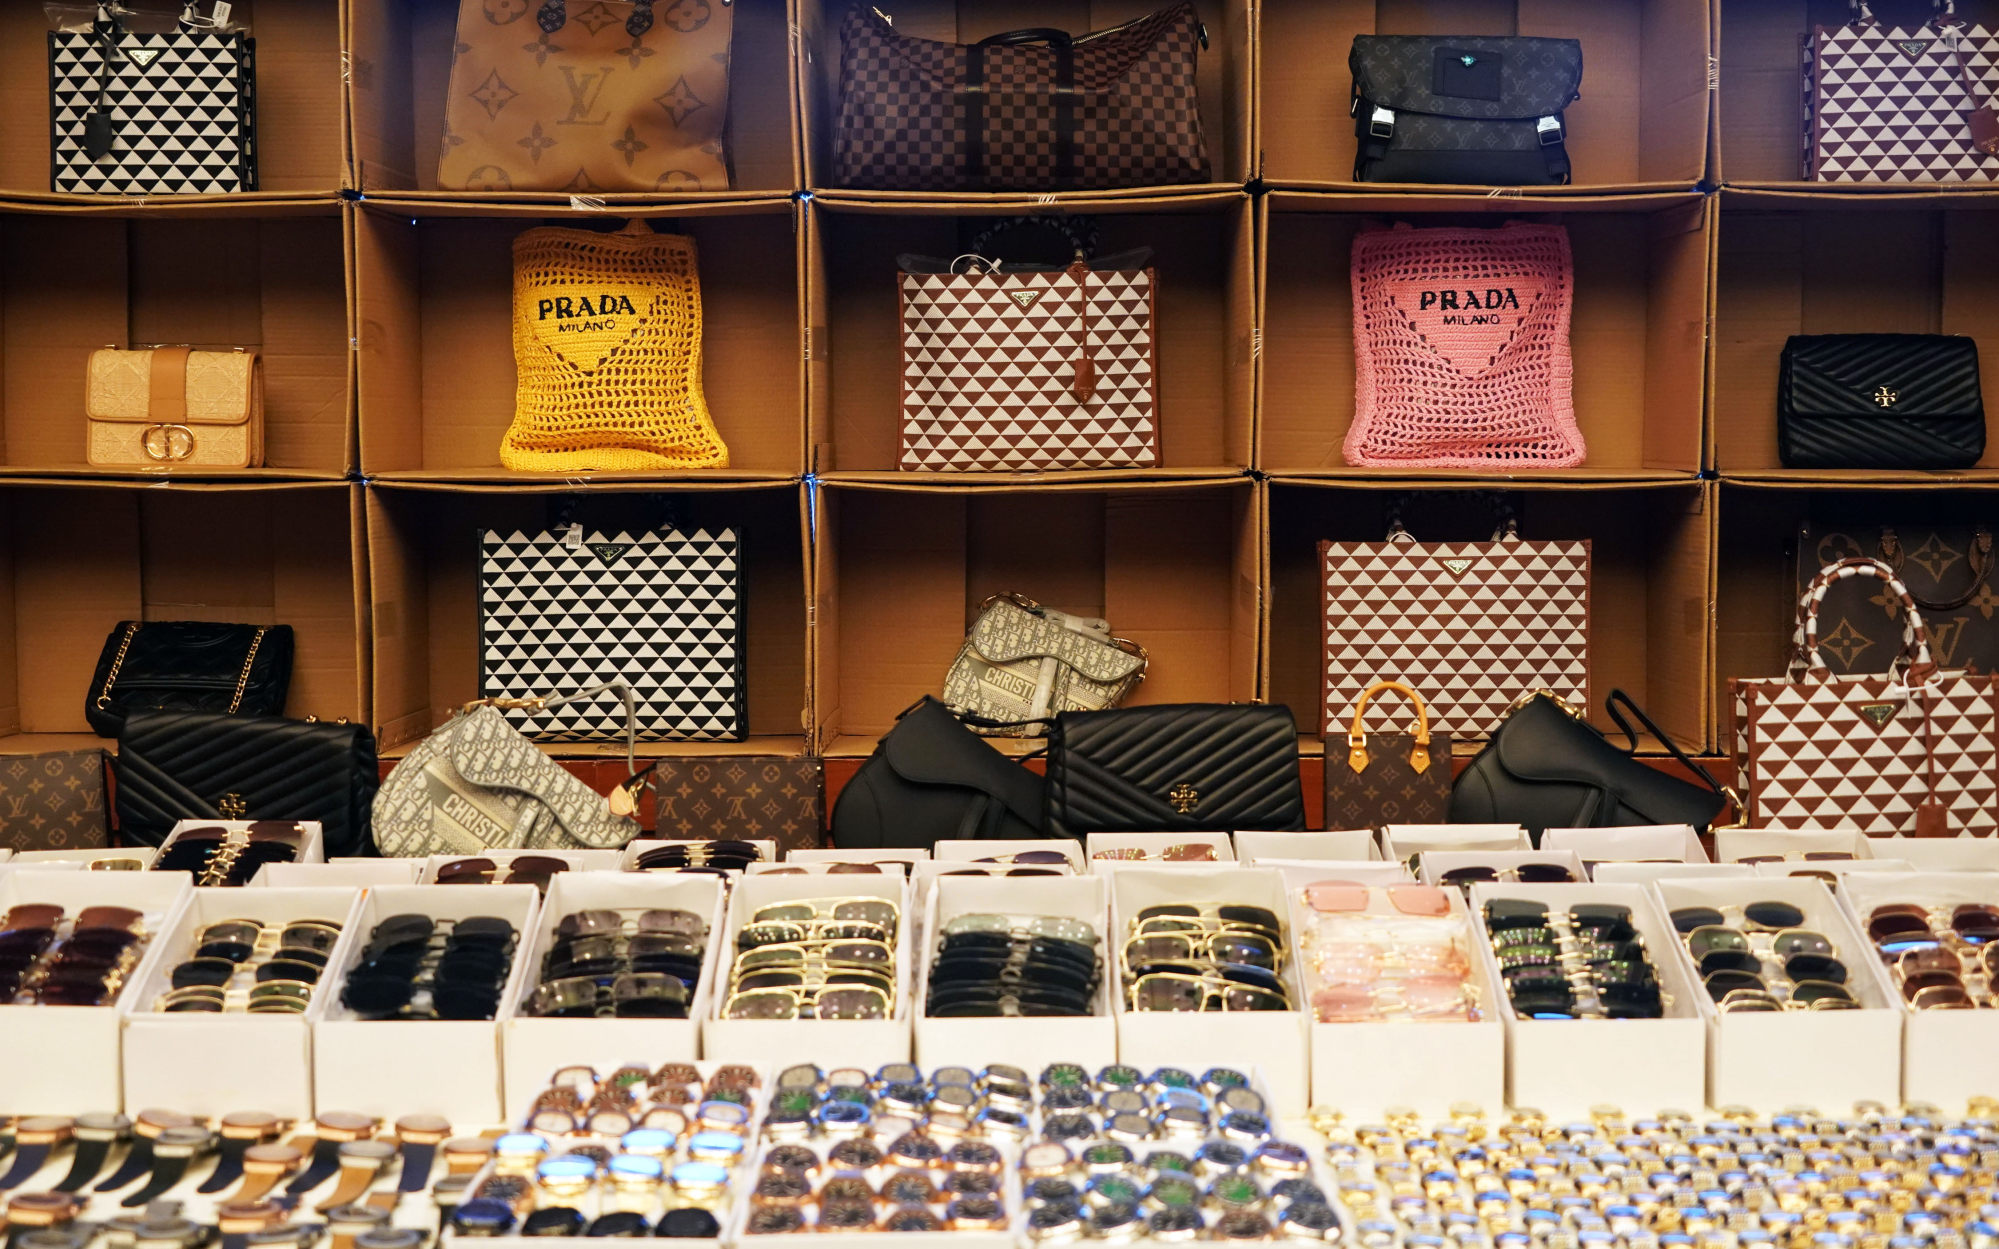 Knock-off handbags and sunglasses with high-end labels were also seized. Photo: Felix Wong